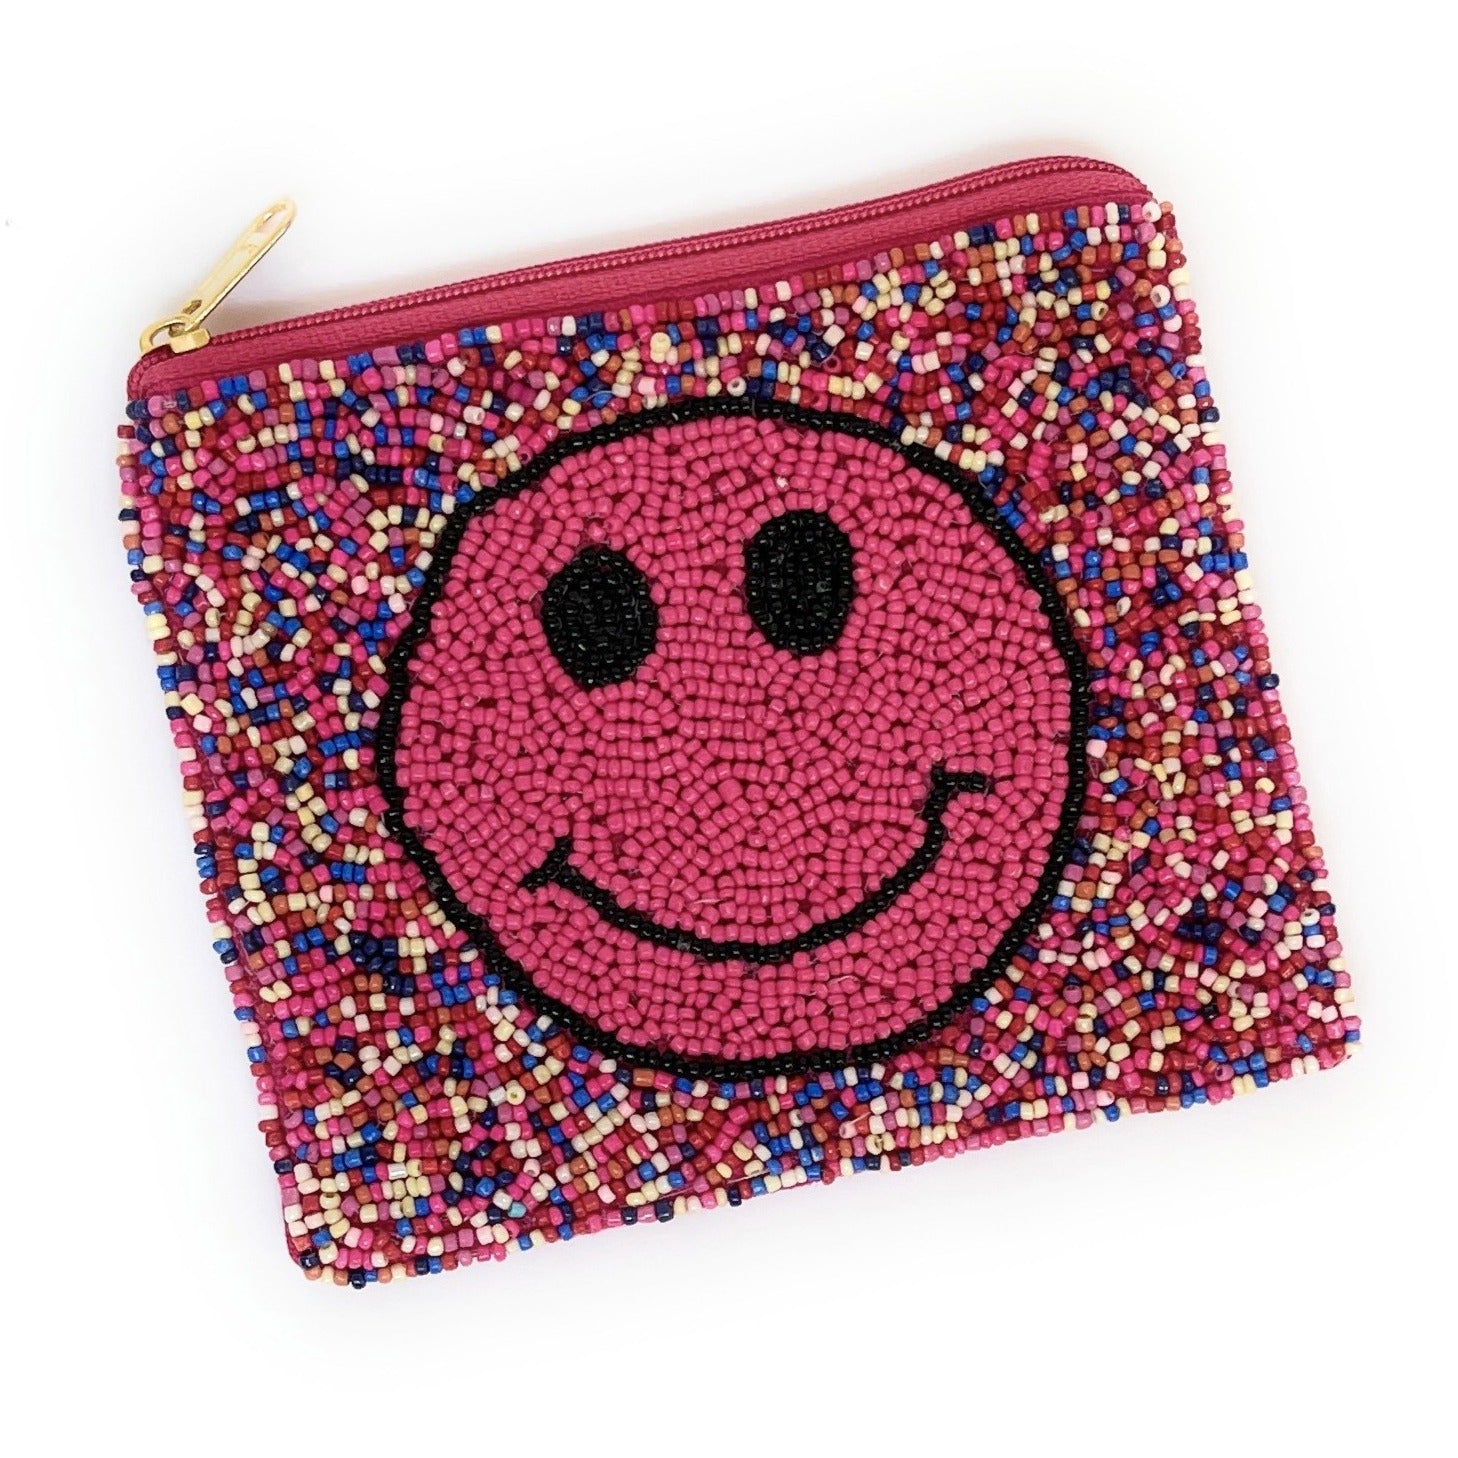 How to Crochet Smiley Purse - YouTube